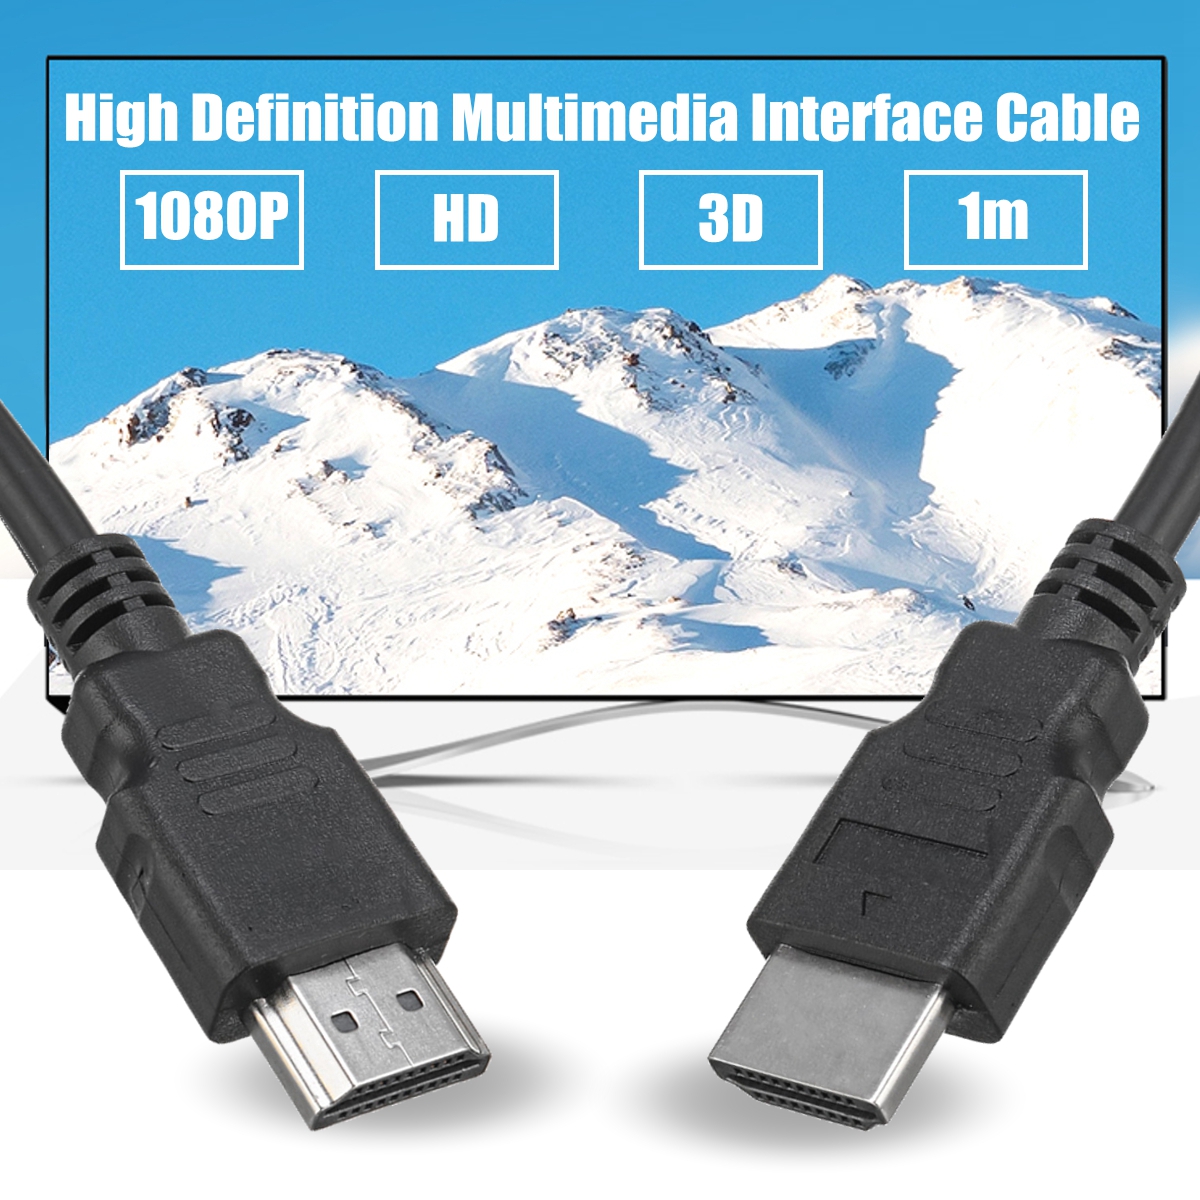 1M-High-Definition-Multimedia-14mm-Audio-Cable-for-Video-Game-Console-HD-TV-DVD-Players-DVR-1440470-1